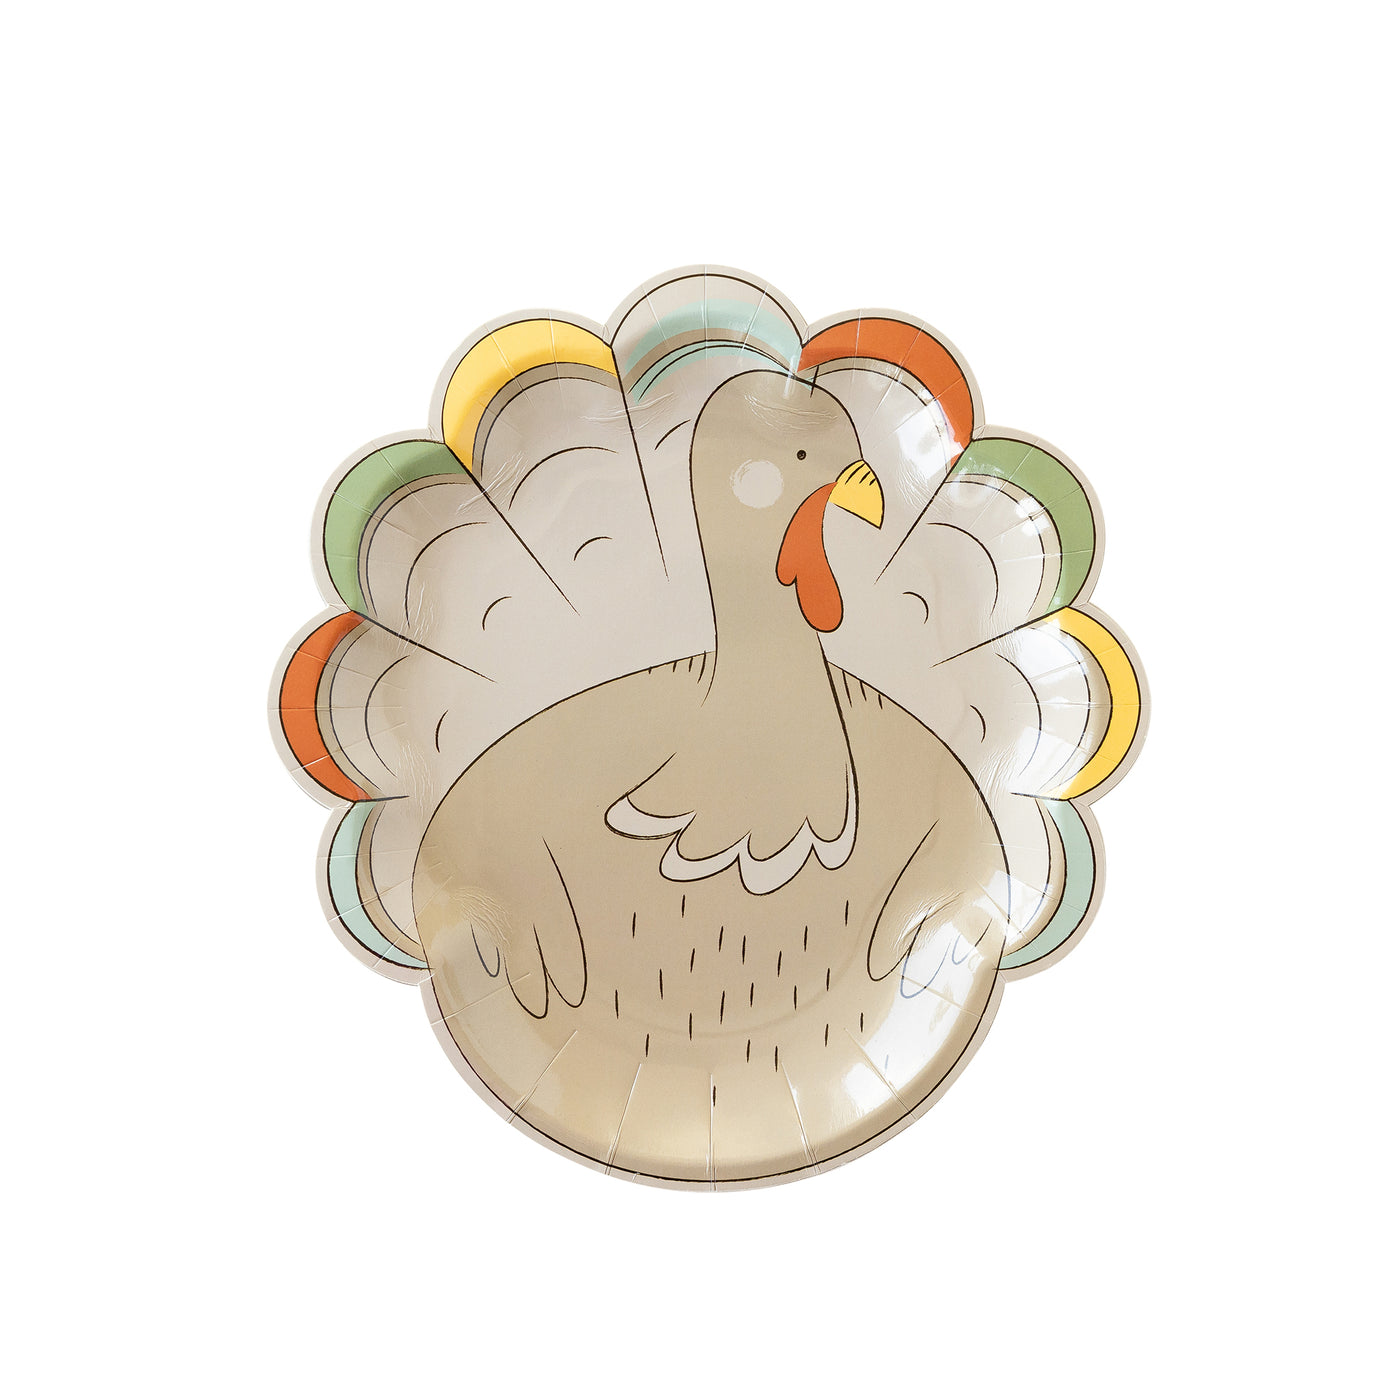 Occasions By Shakira - Harvest Turkey Shaped Paper Plate